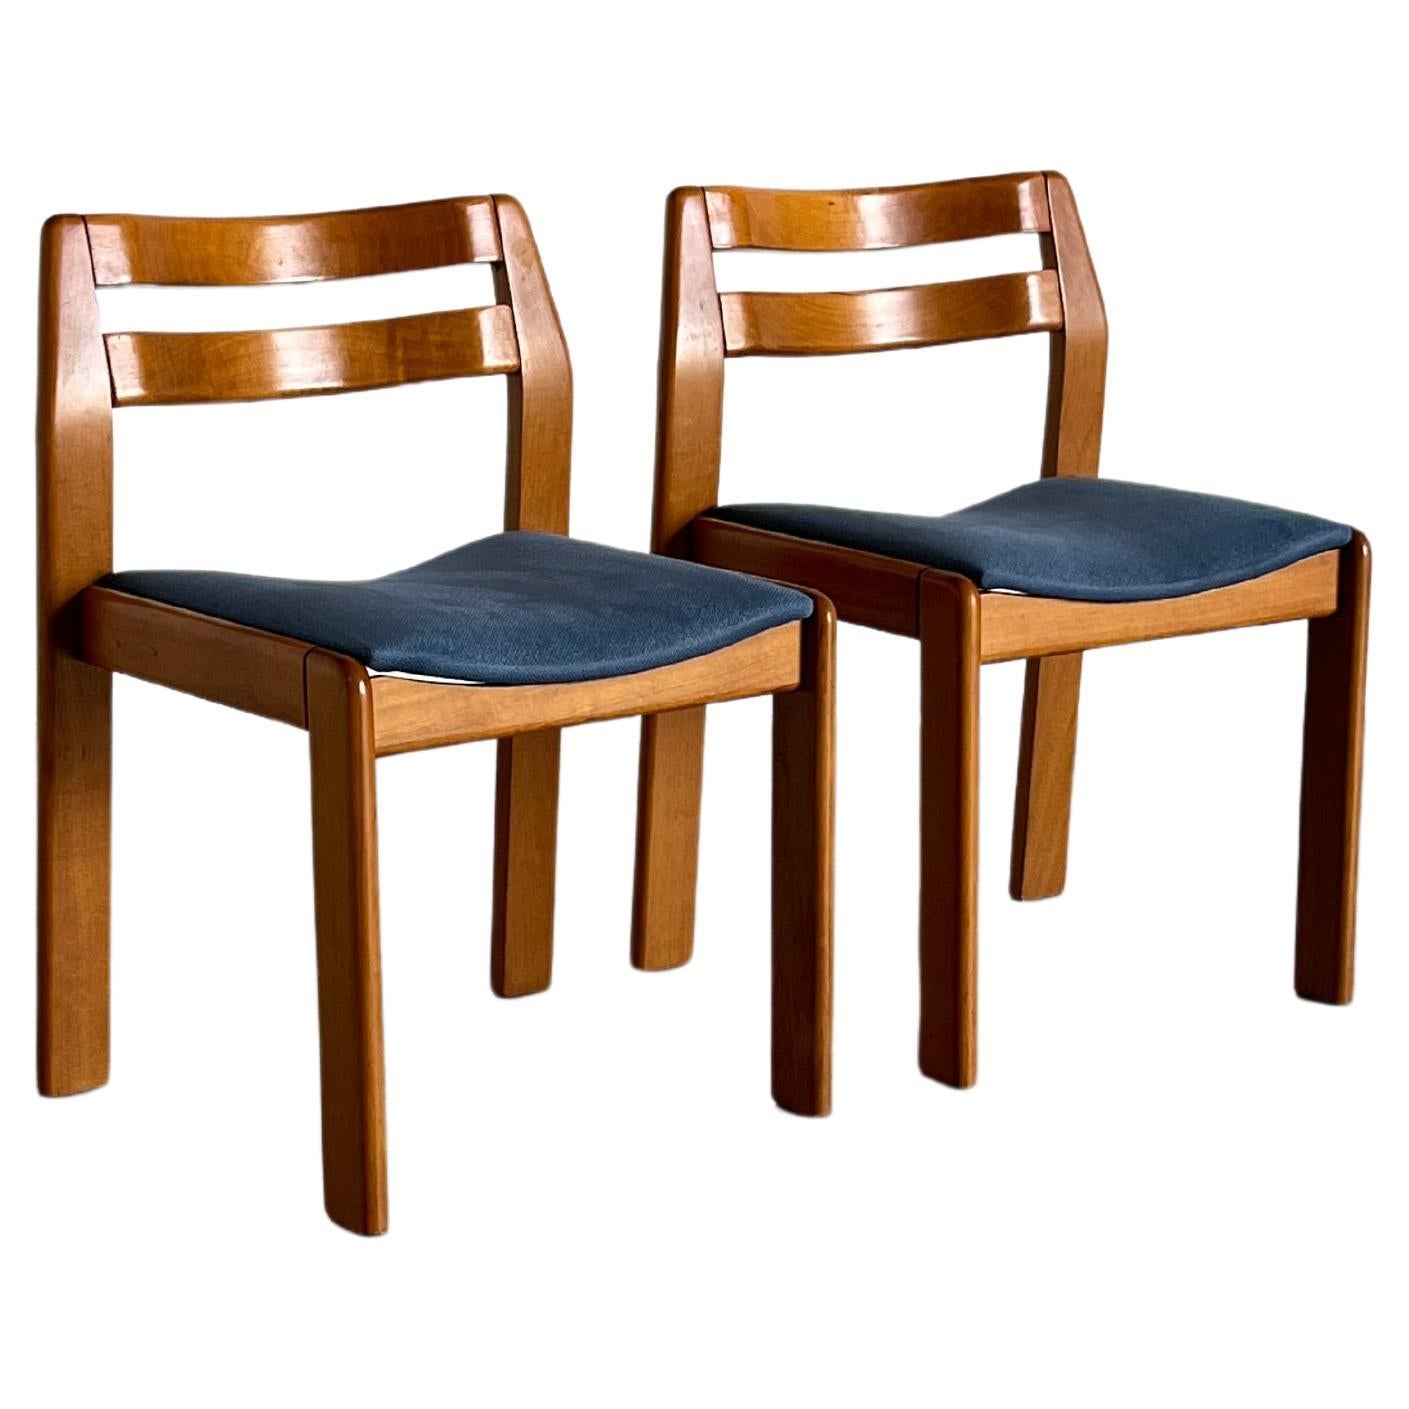 Pair of Elegant Italian Mid-Century Modern Lacquered Wood Dining Chairs, 1960s For Sale